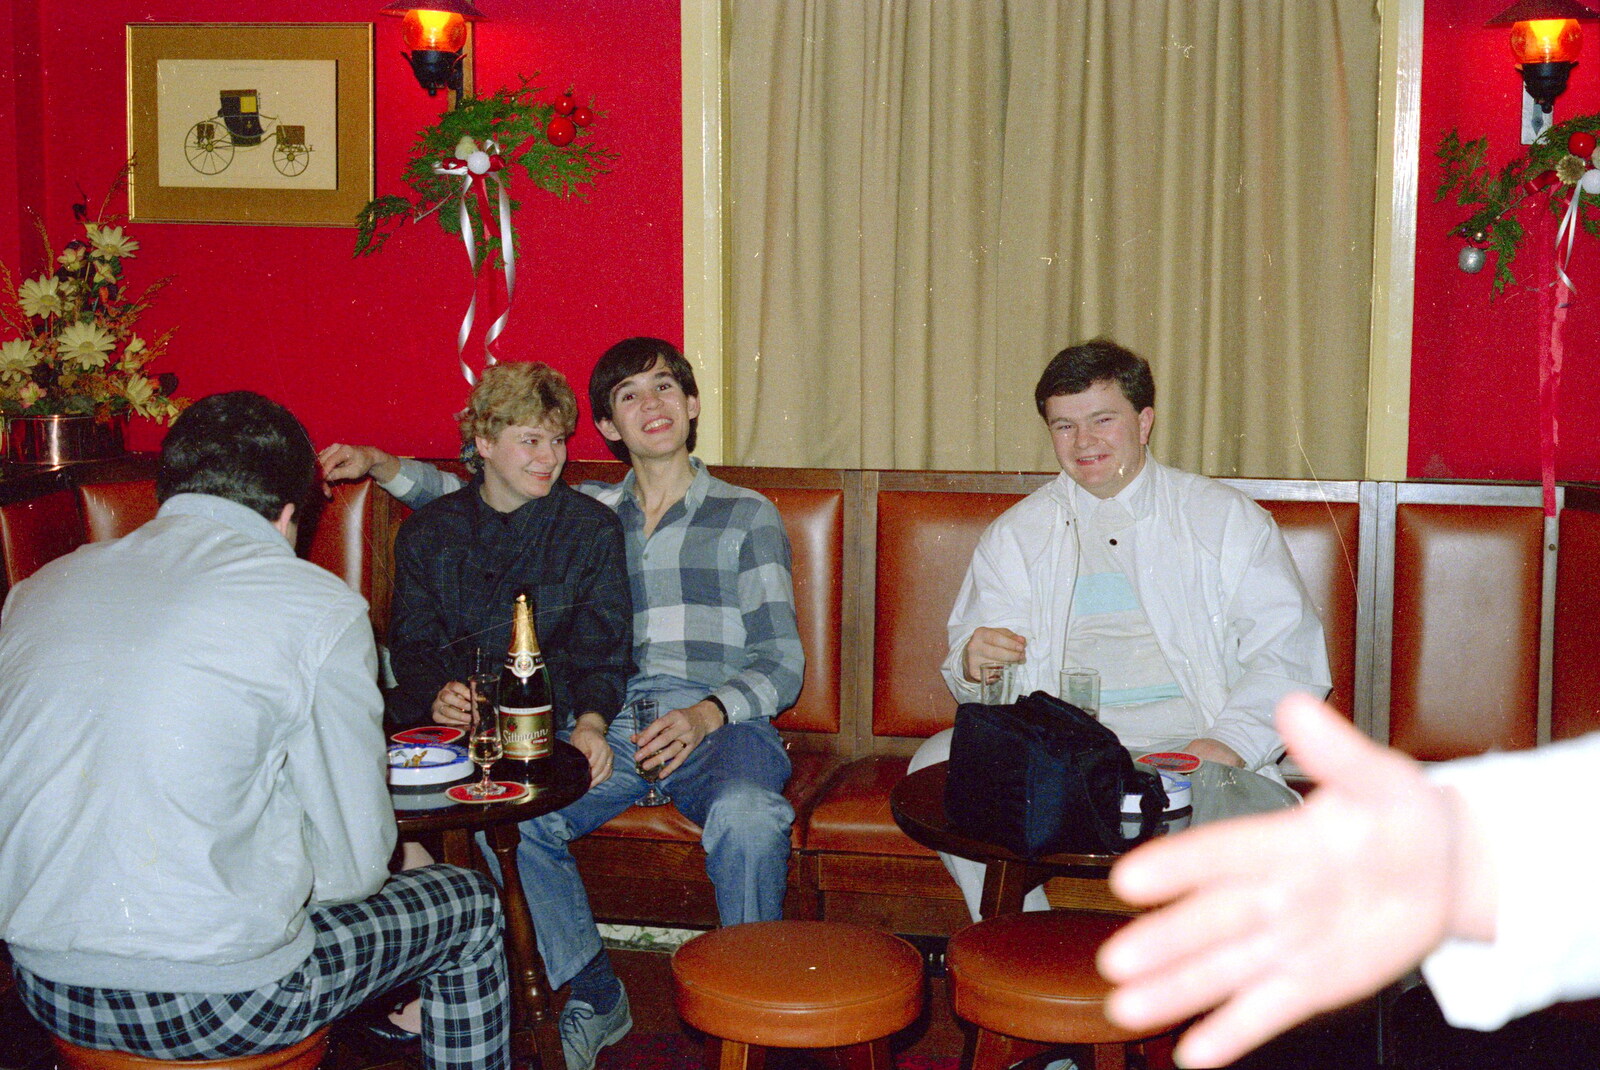 Jon, Anna, Phil and Hamish in a pub  from Brockenhurst College Presentation and Christmas, Hampshire - 19th December 1985